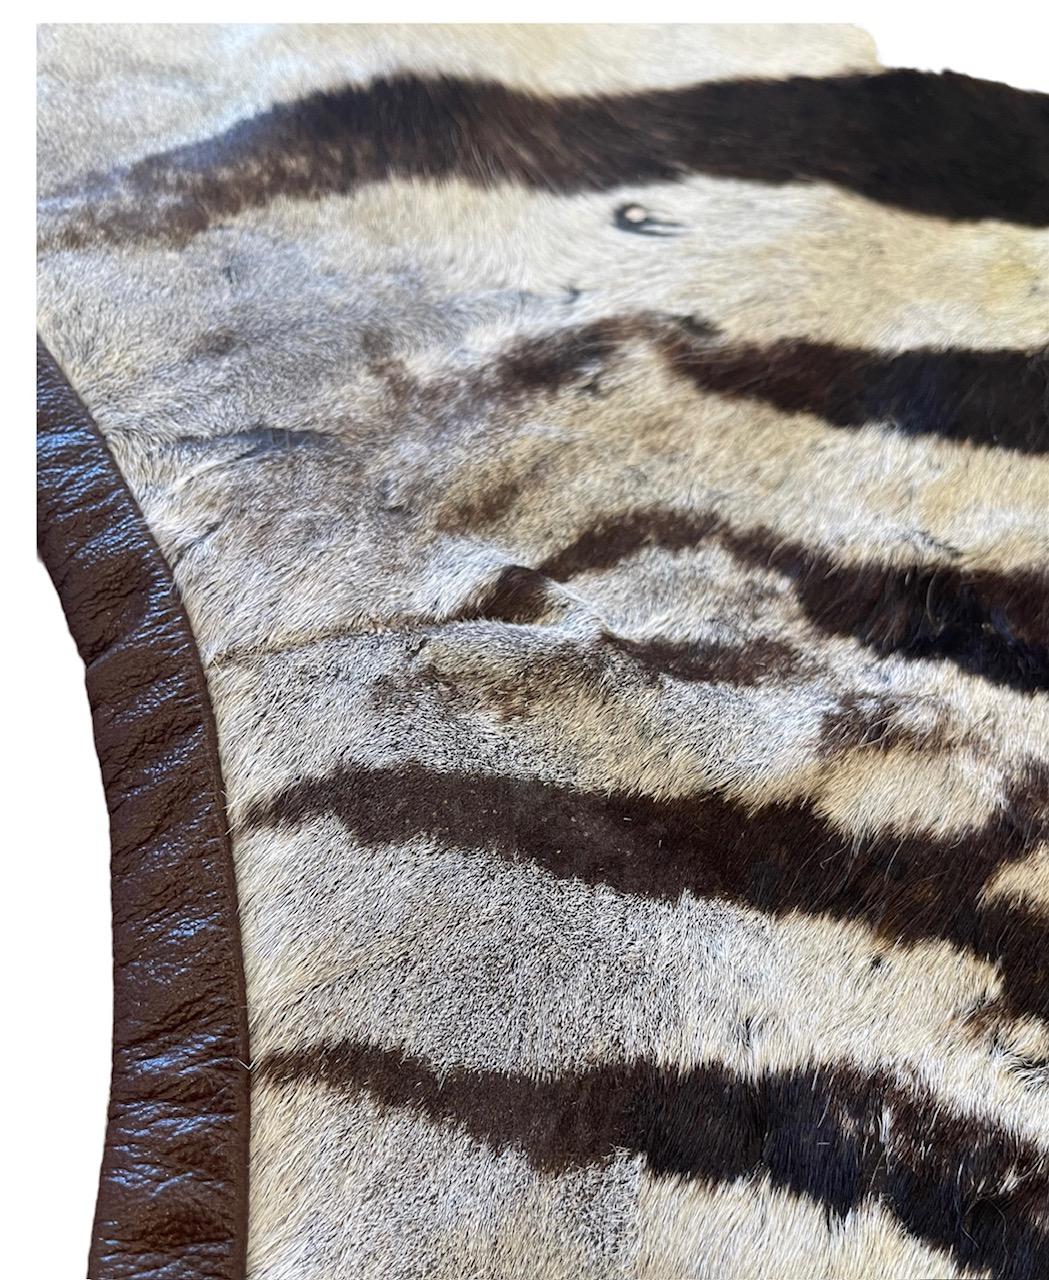 Come and browse our selection of South African Zebra Rugs. With our superb craftsmanship and quality stock, we can assure you that this stable luxury item will last for years to come. Each rug is fitted with a weighted handstitched lining. This